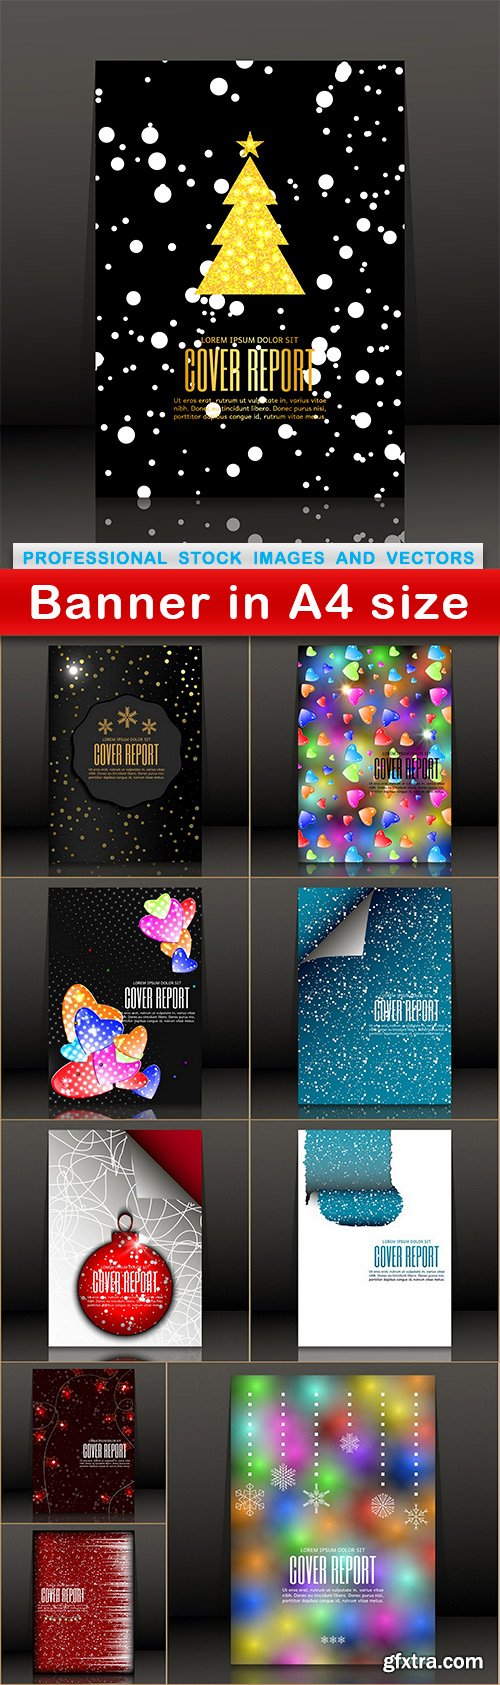 Banner in A4 size - 10 EPS